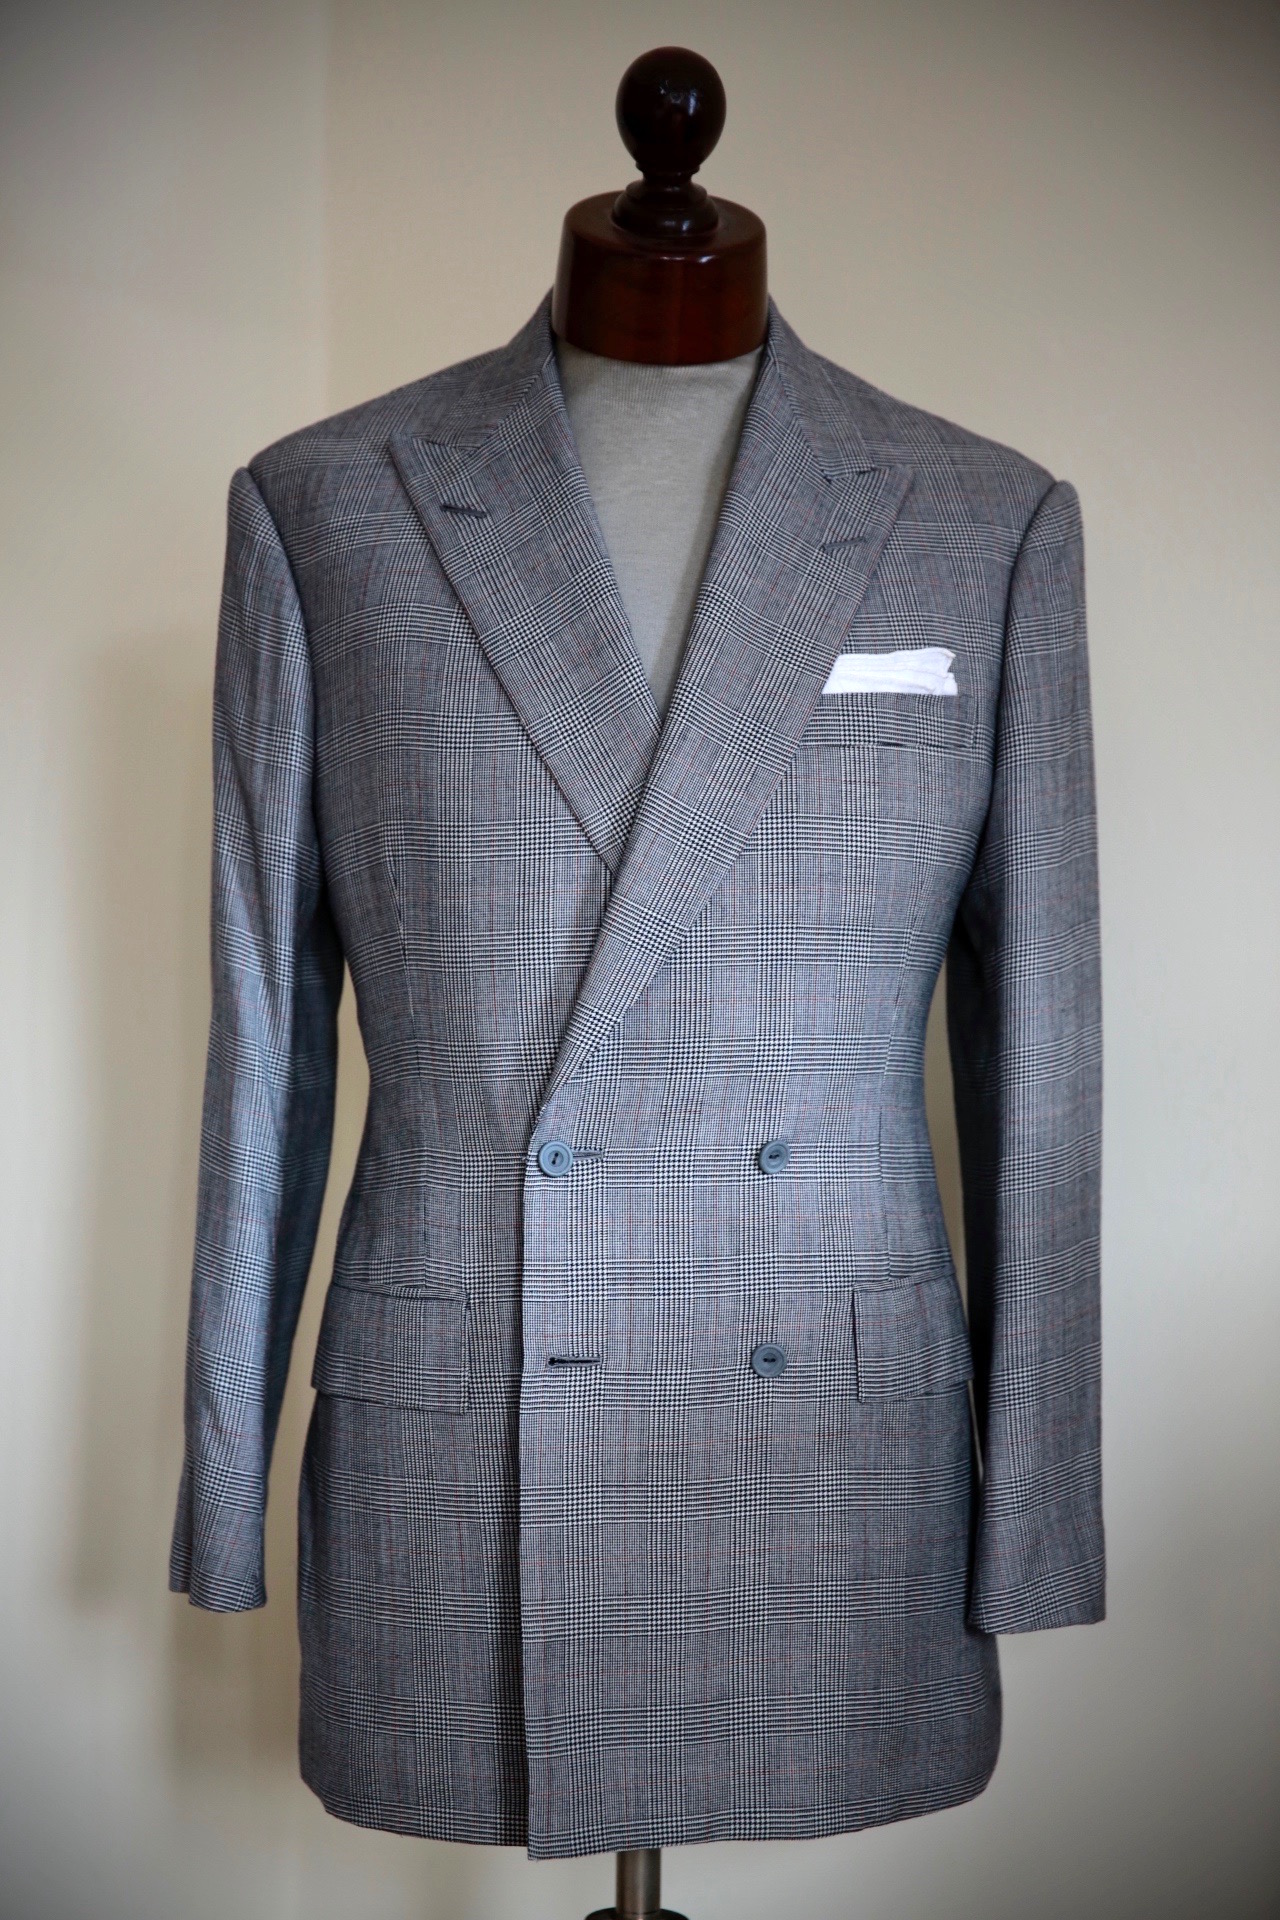 Variations on the Double-Breasted Jacket: Buttons, Wrap and Lapel